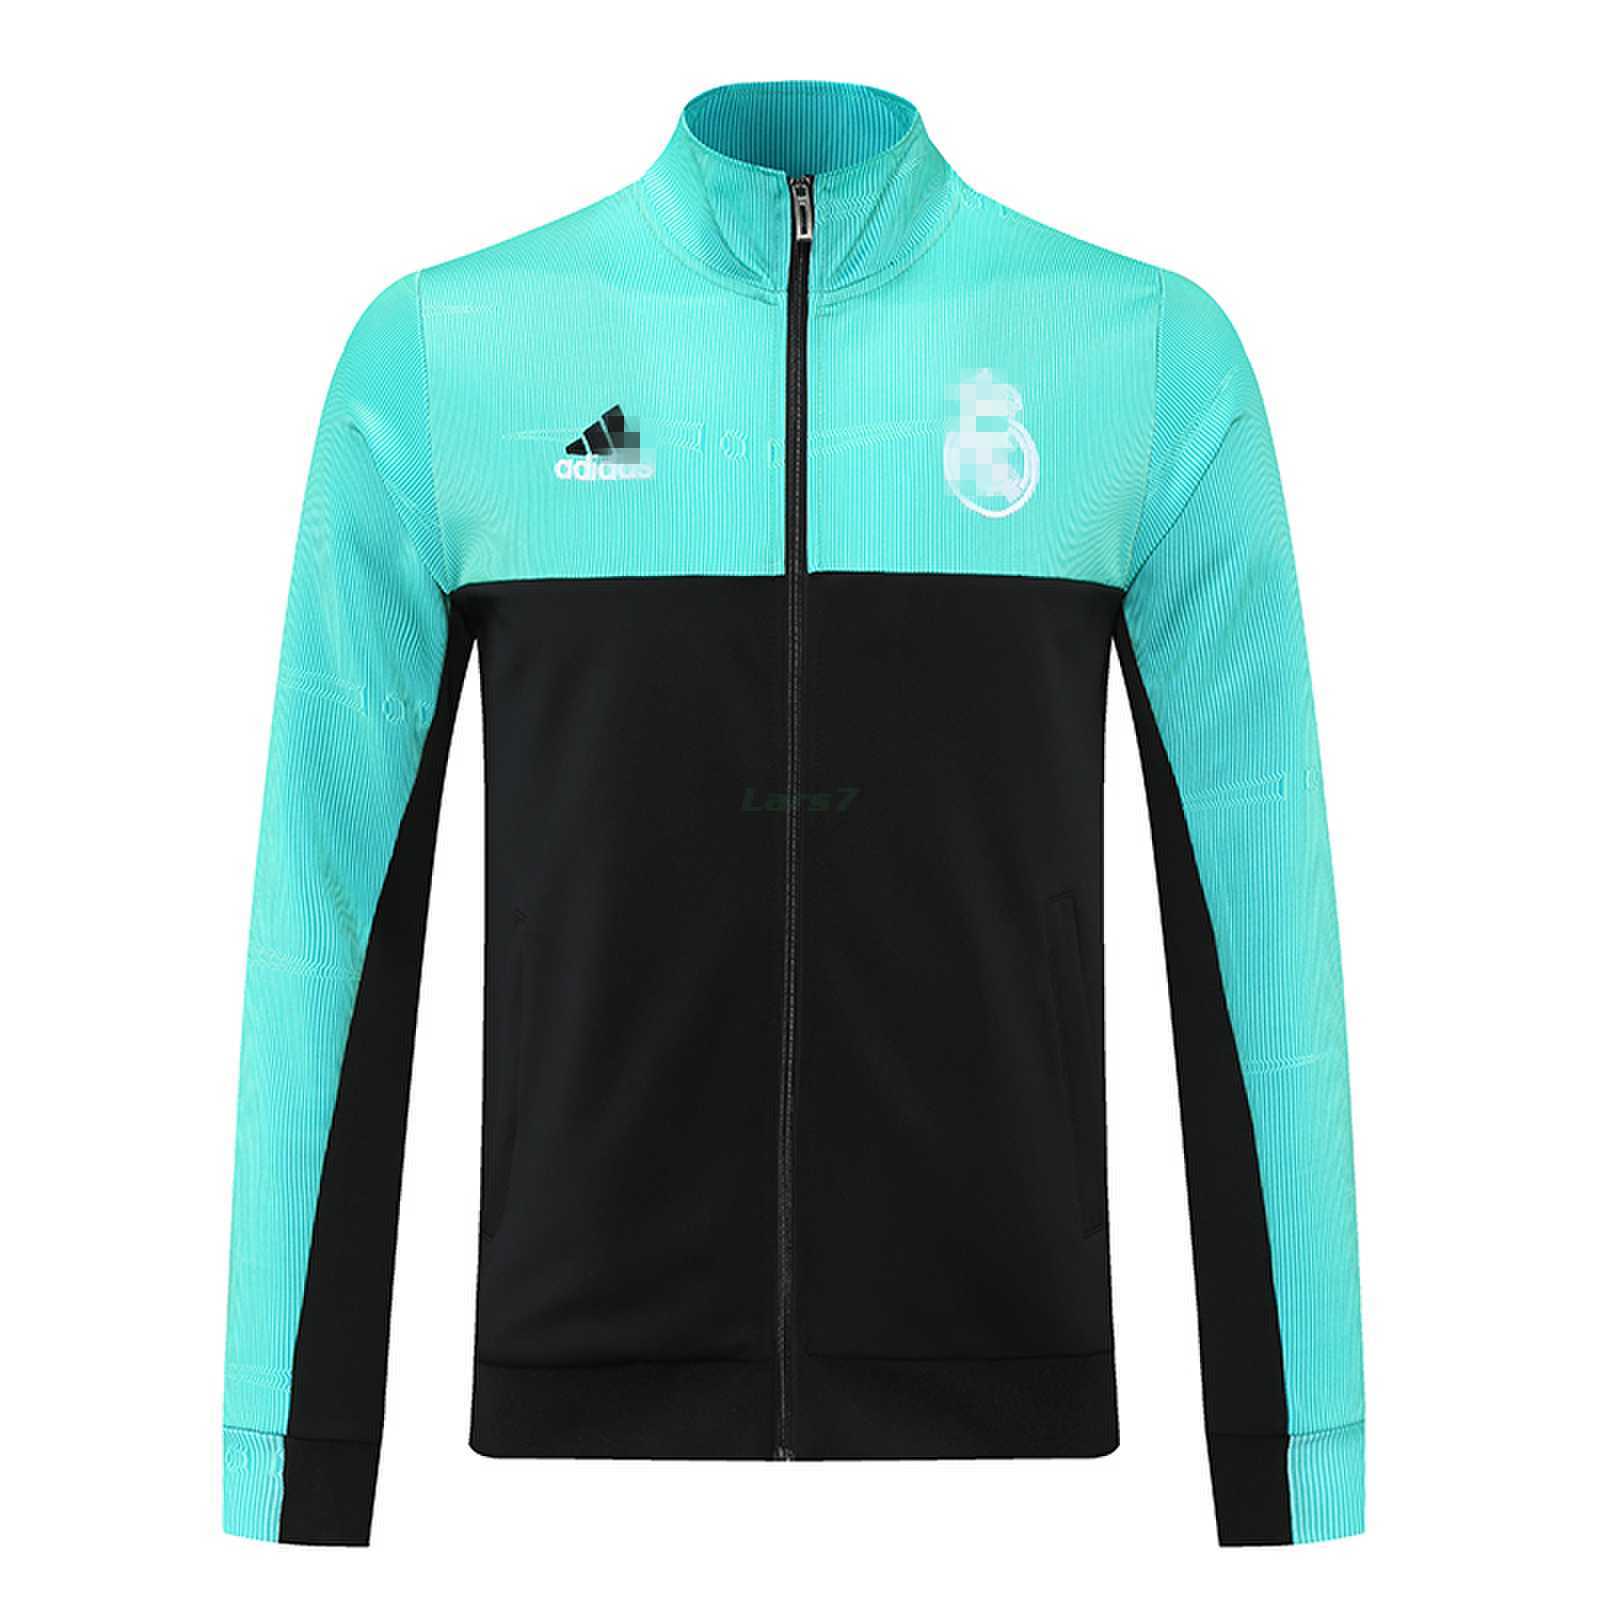 chandal real madrid hombre corte ingles